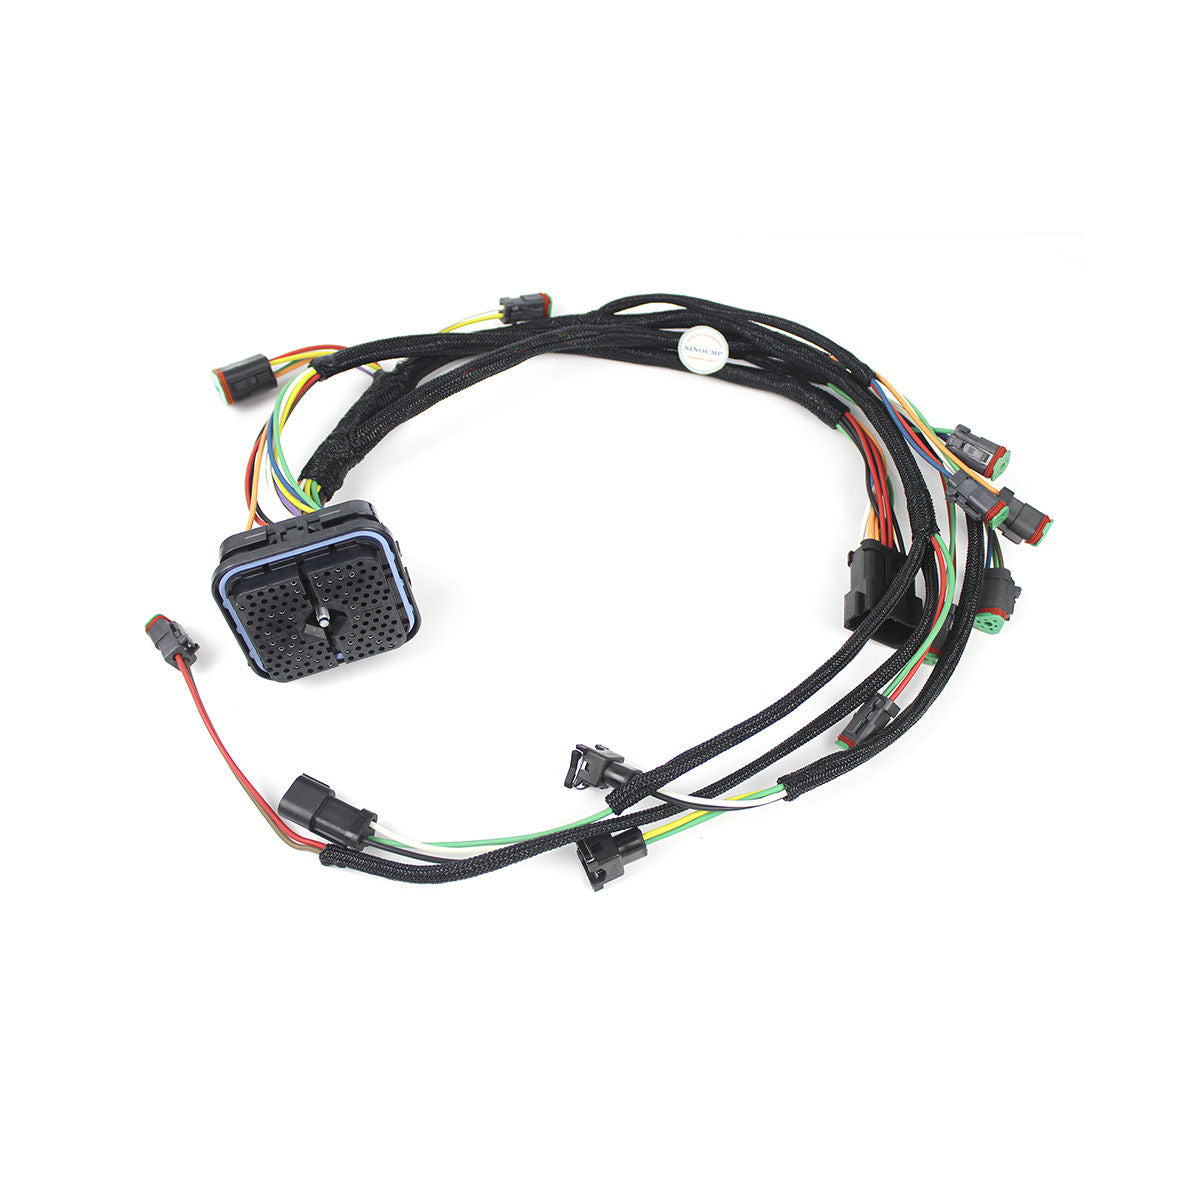 1982713 198-2713 Engine Wiring Harness for CAT E325D C7 Engine - Sinocmp